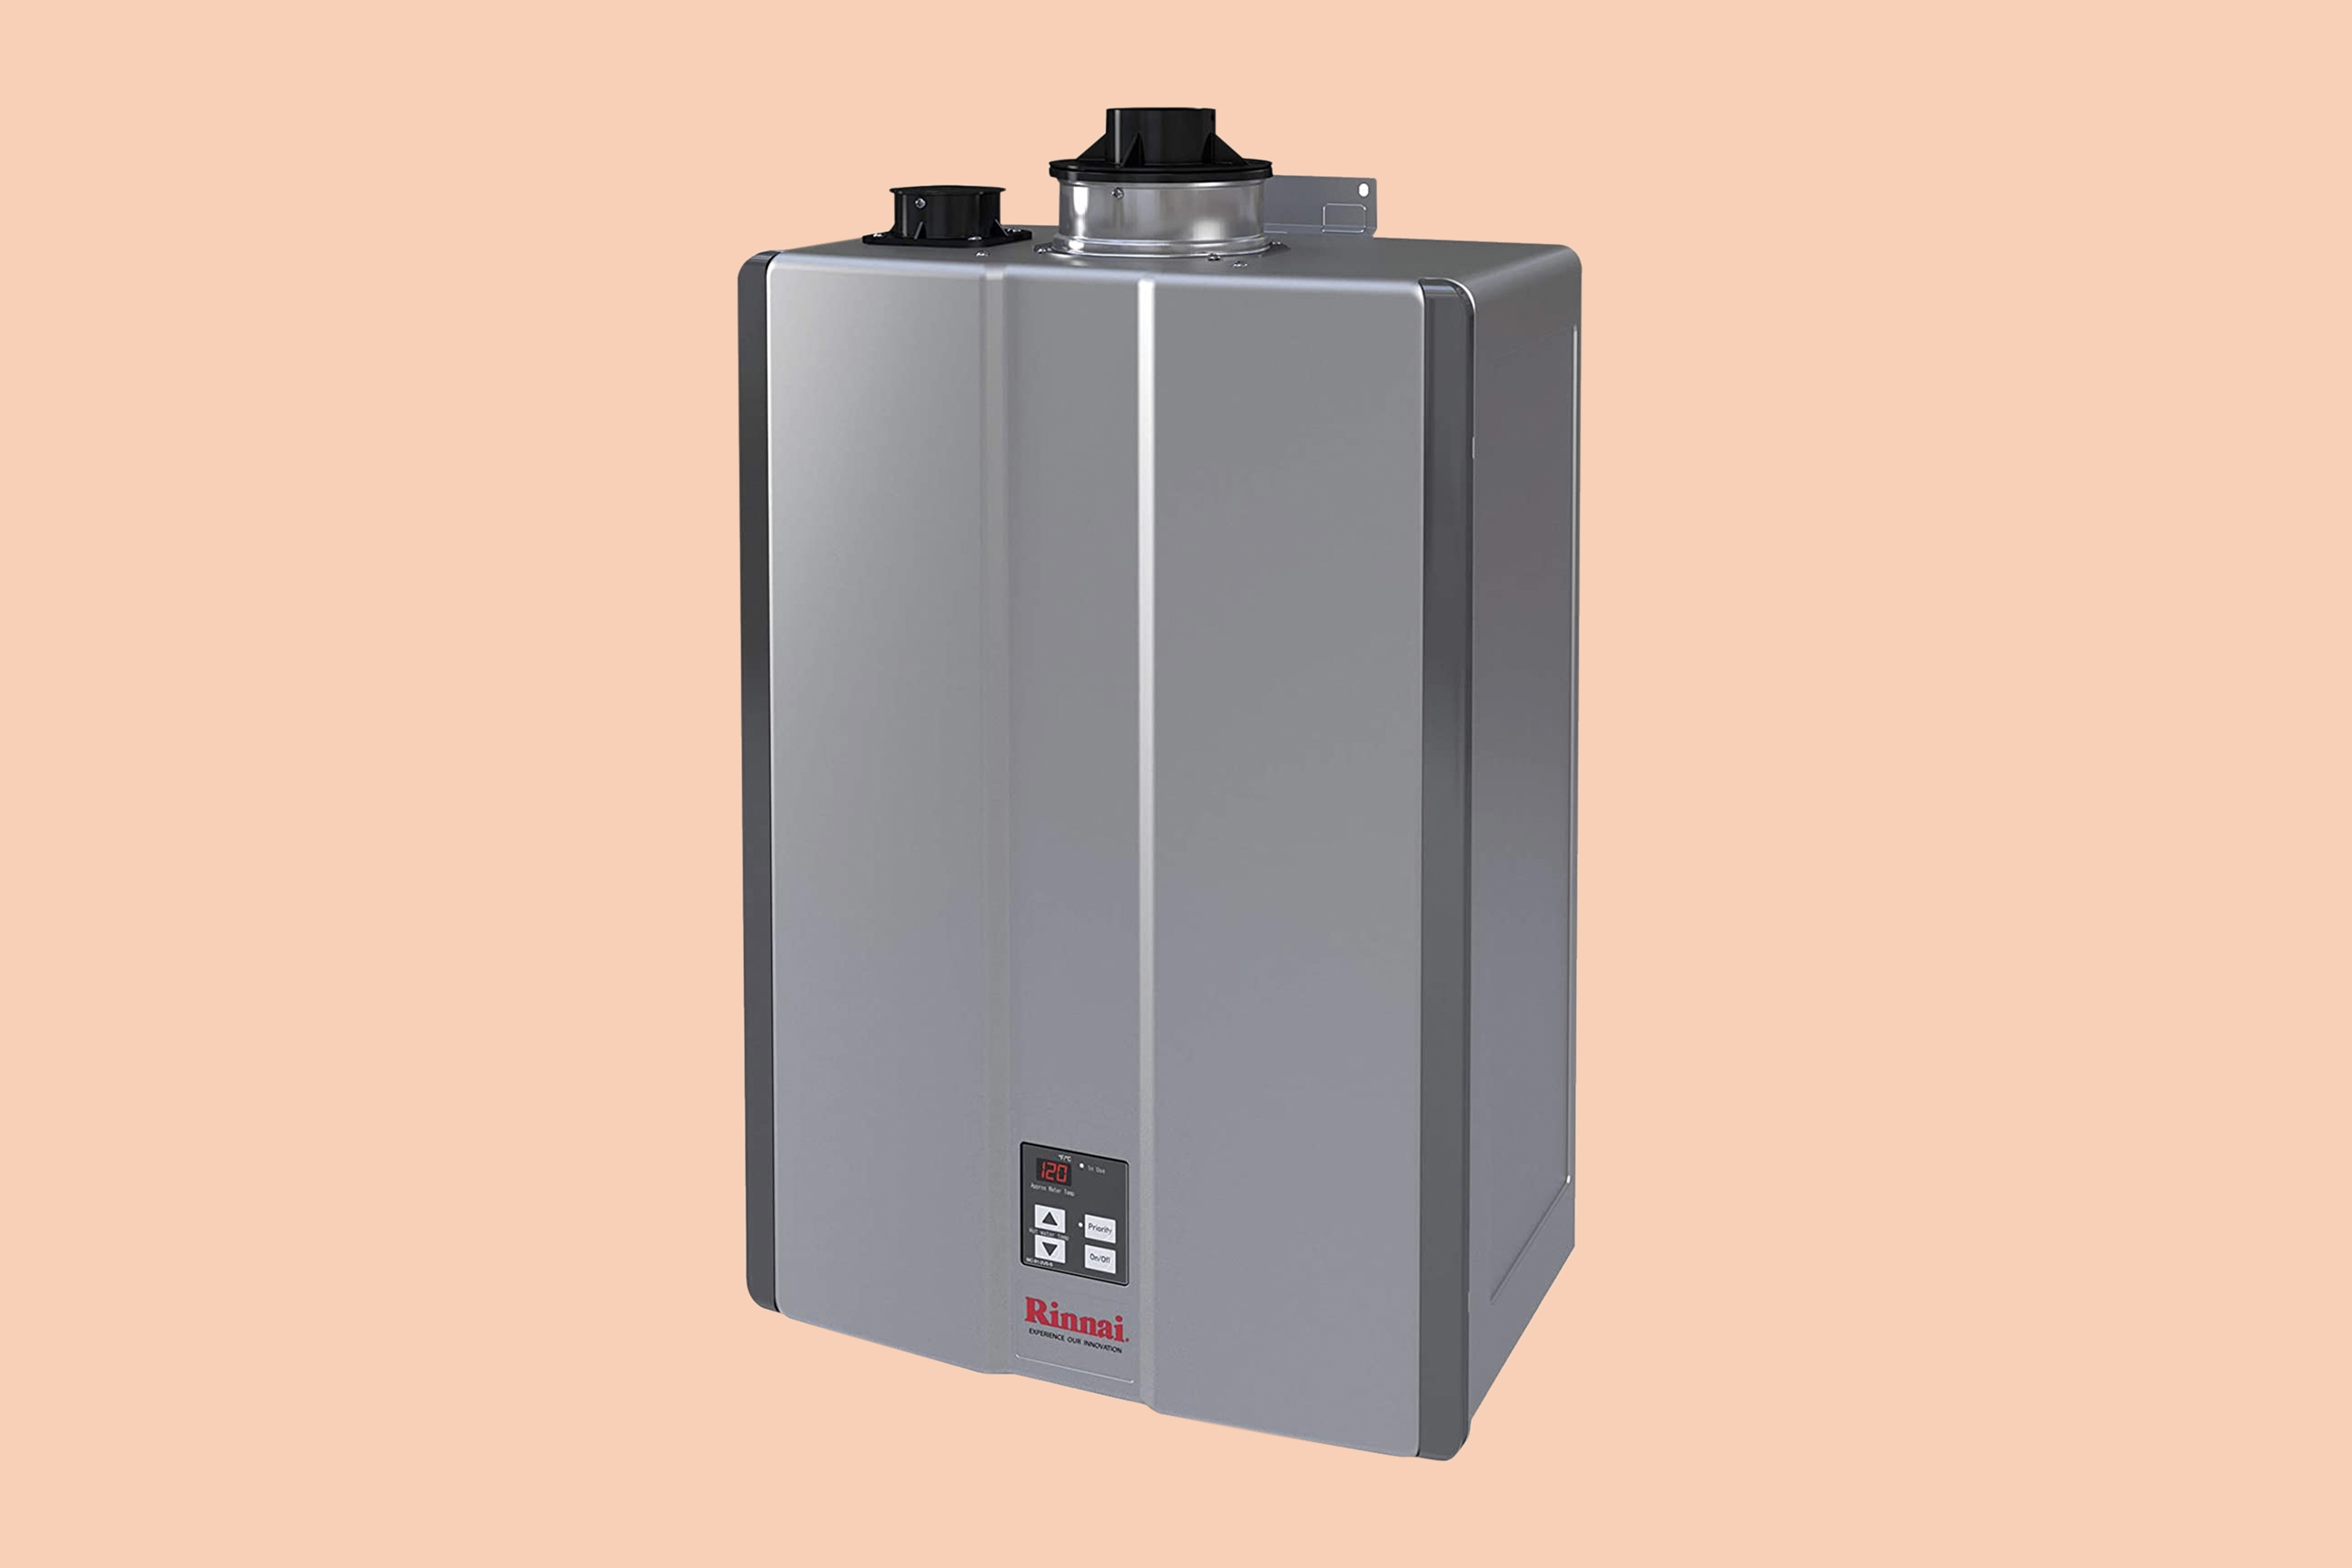 Silver Tankless Water Heater with Control Pad